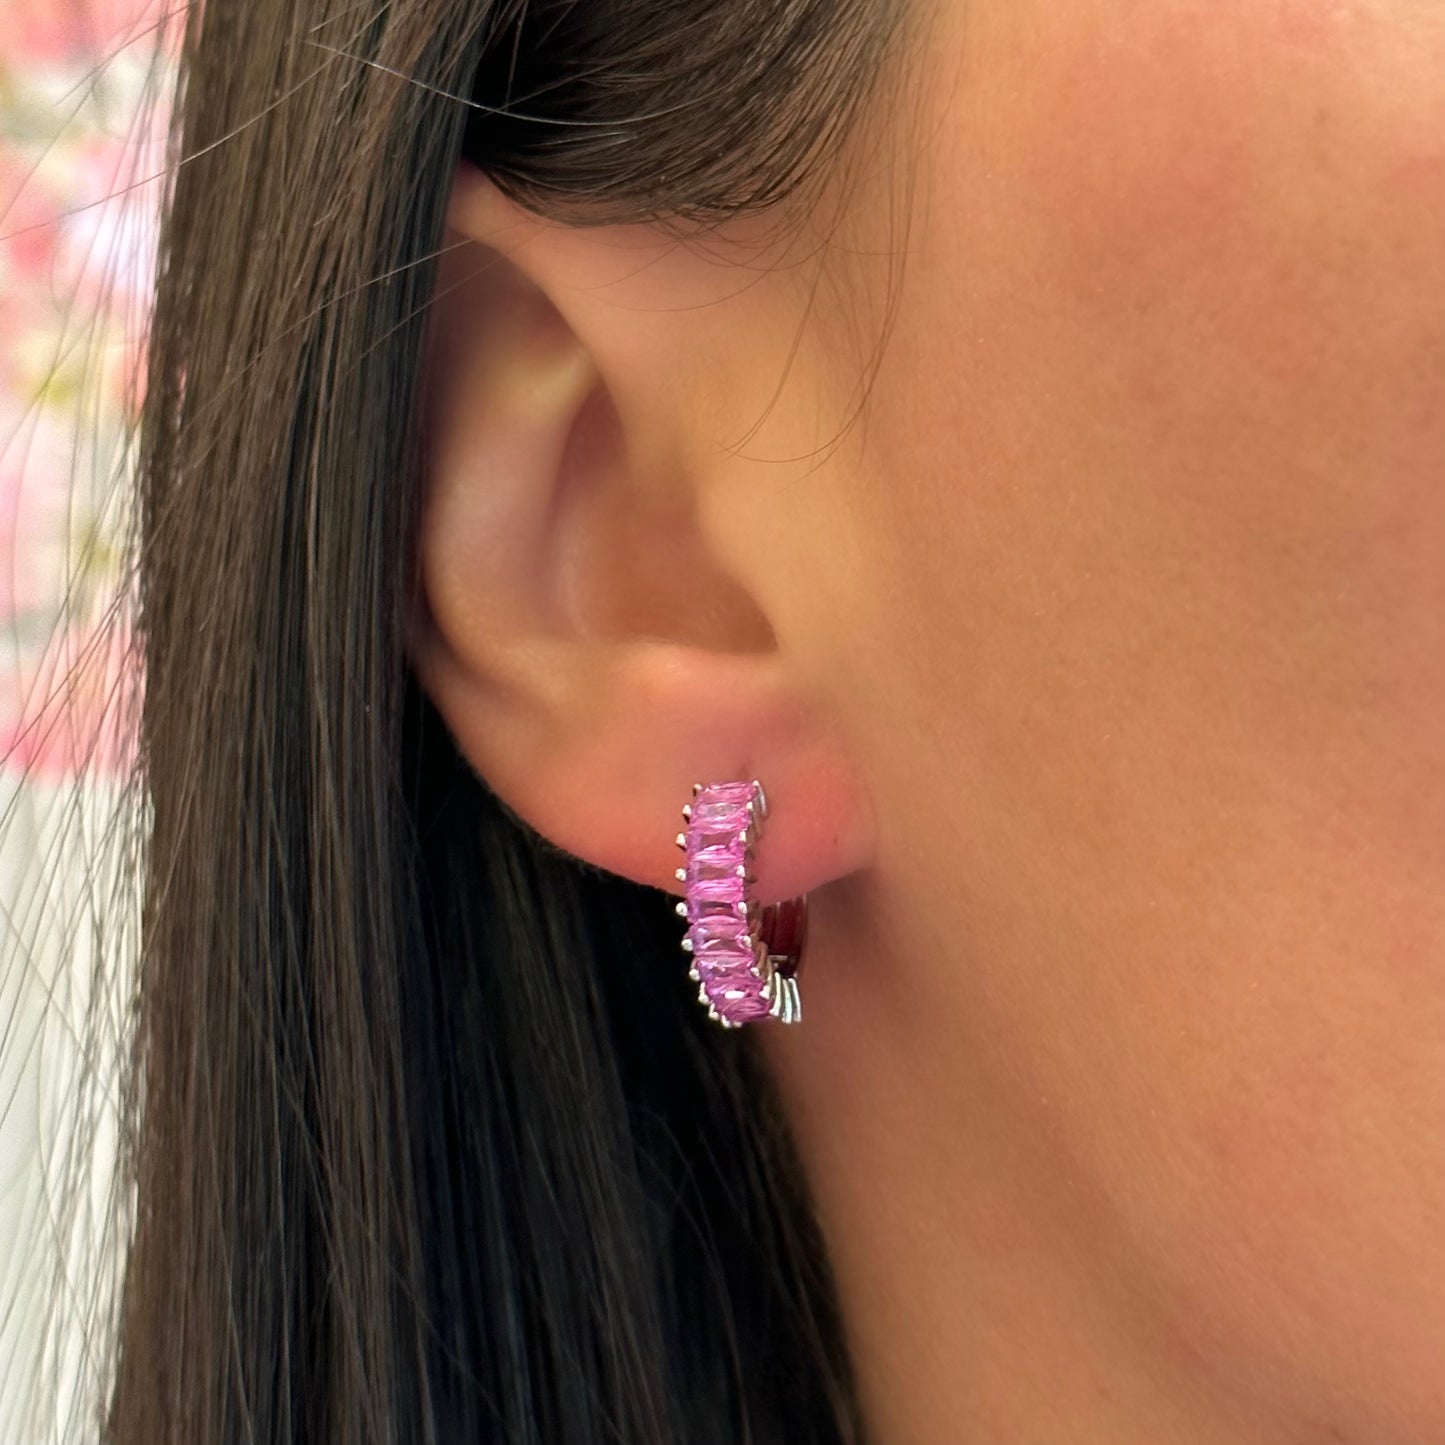 PINK STUDDED HOOPS EARRINGS | White Rhodium Plated